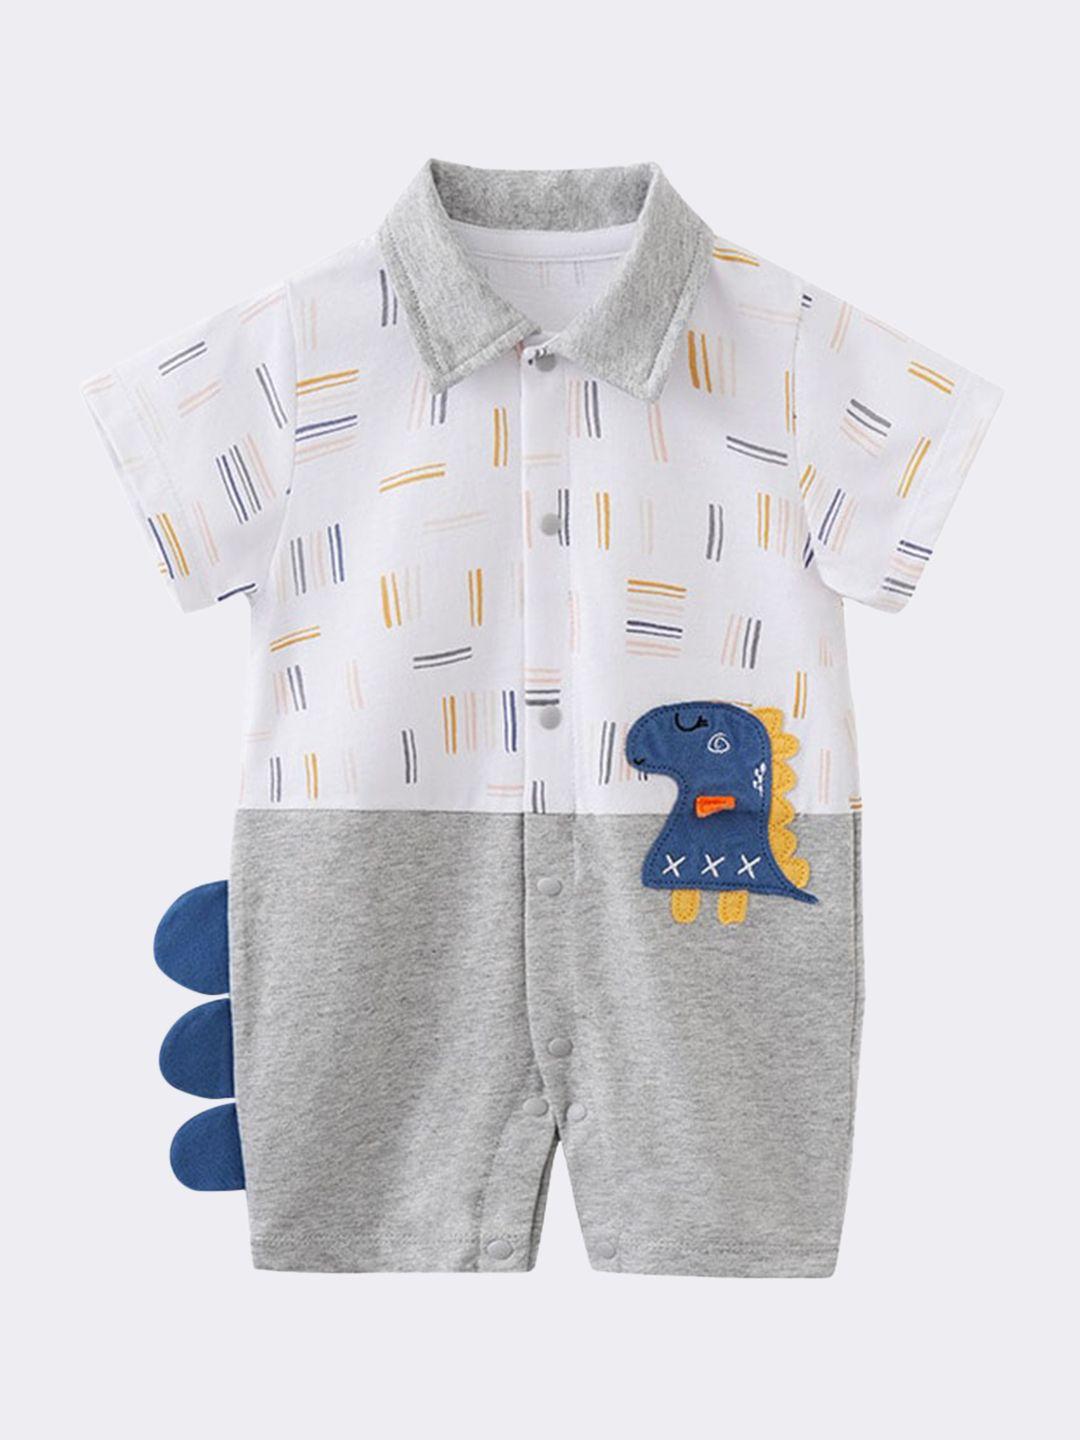 stylecast grey & white infant boys printed shirt collar cotton rompers